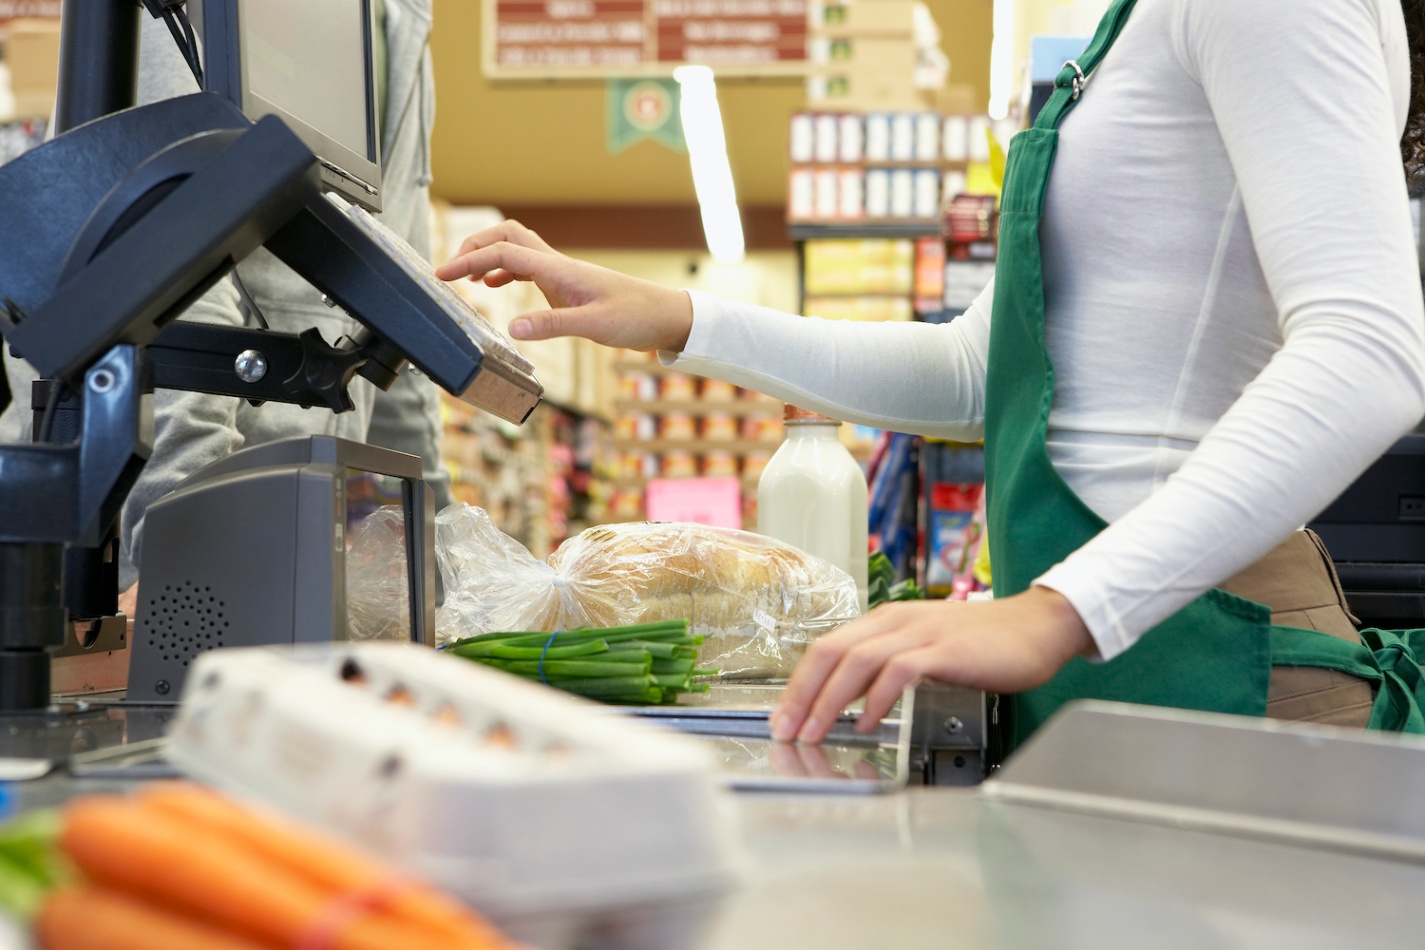 Learn How to Find Vacancies for Supermarket Cashier Jobs